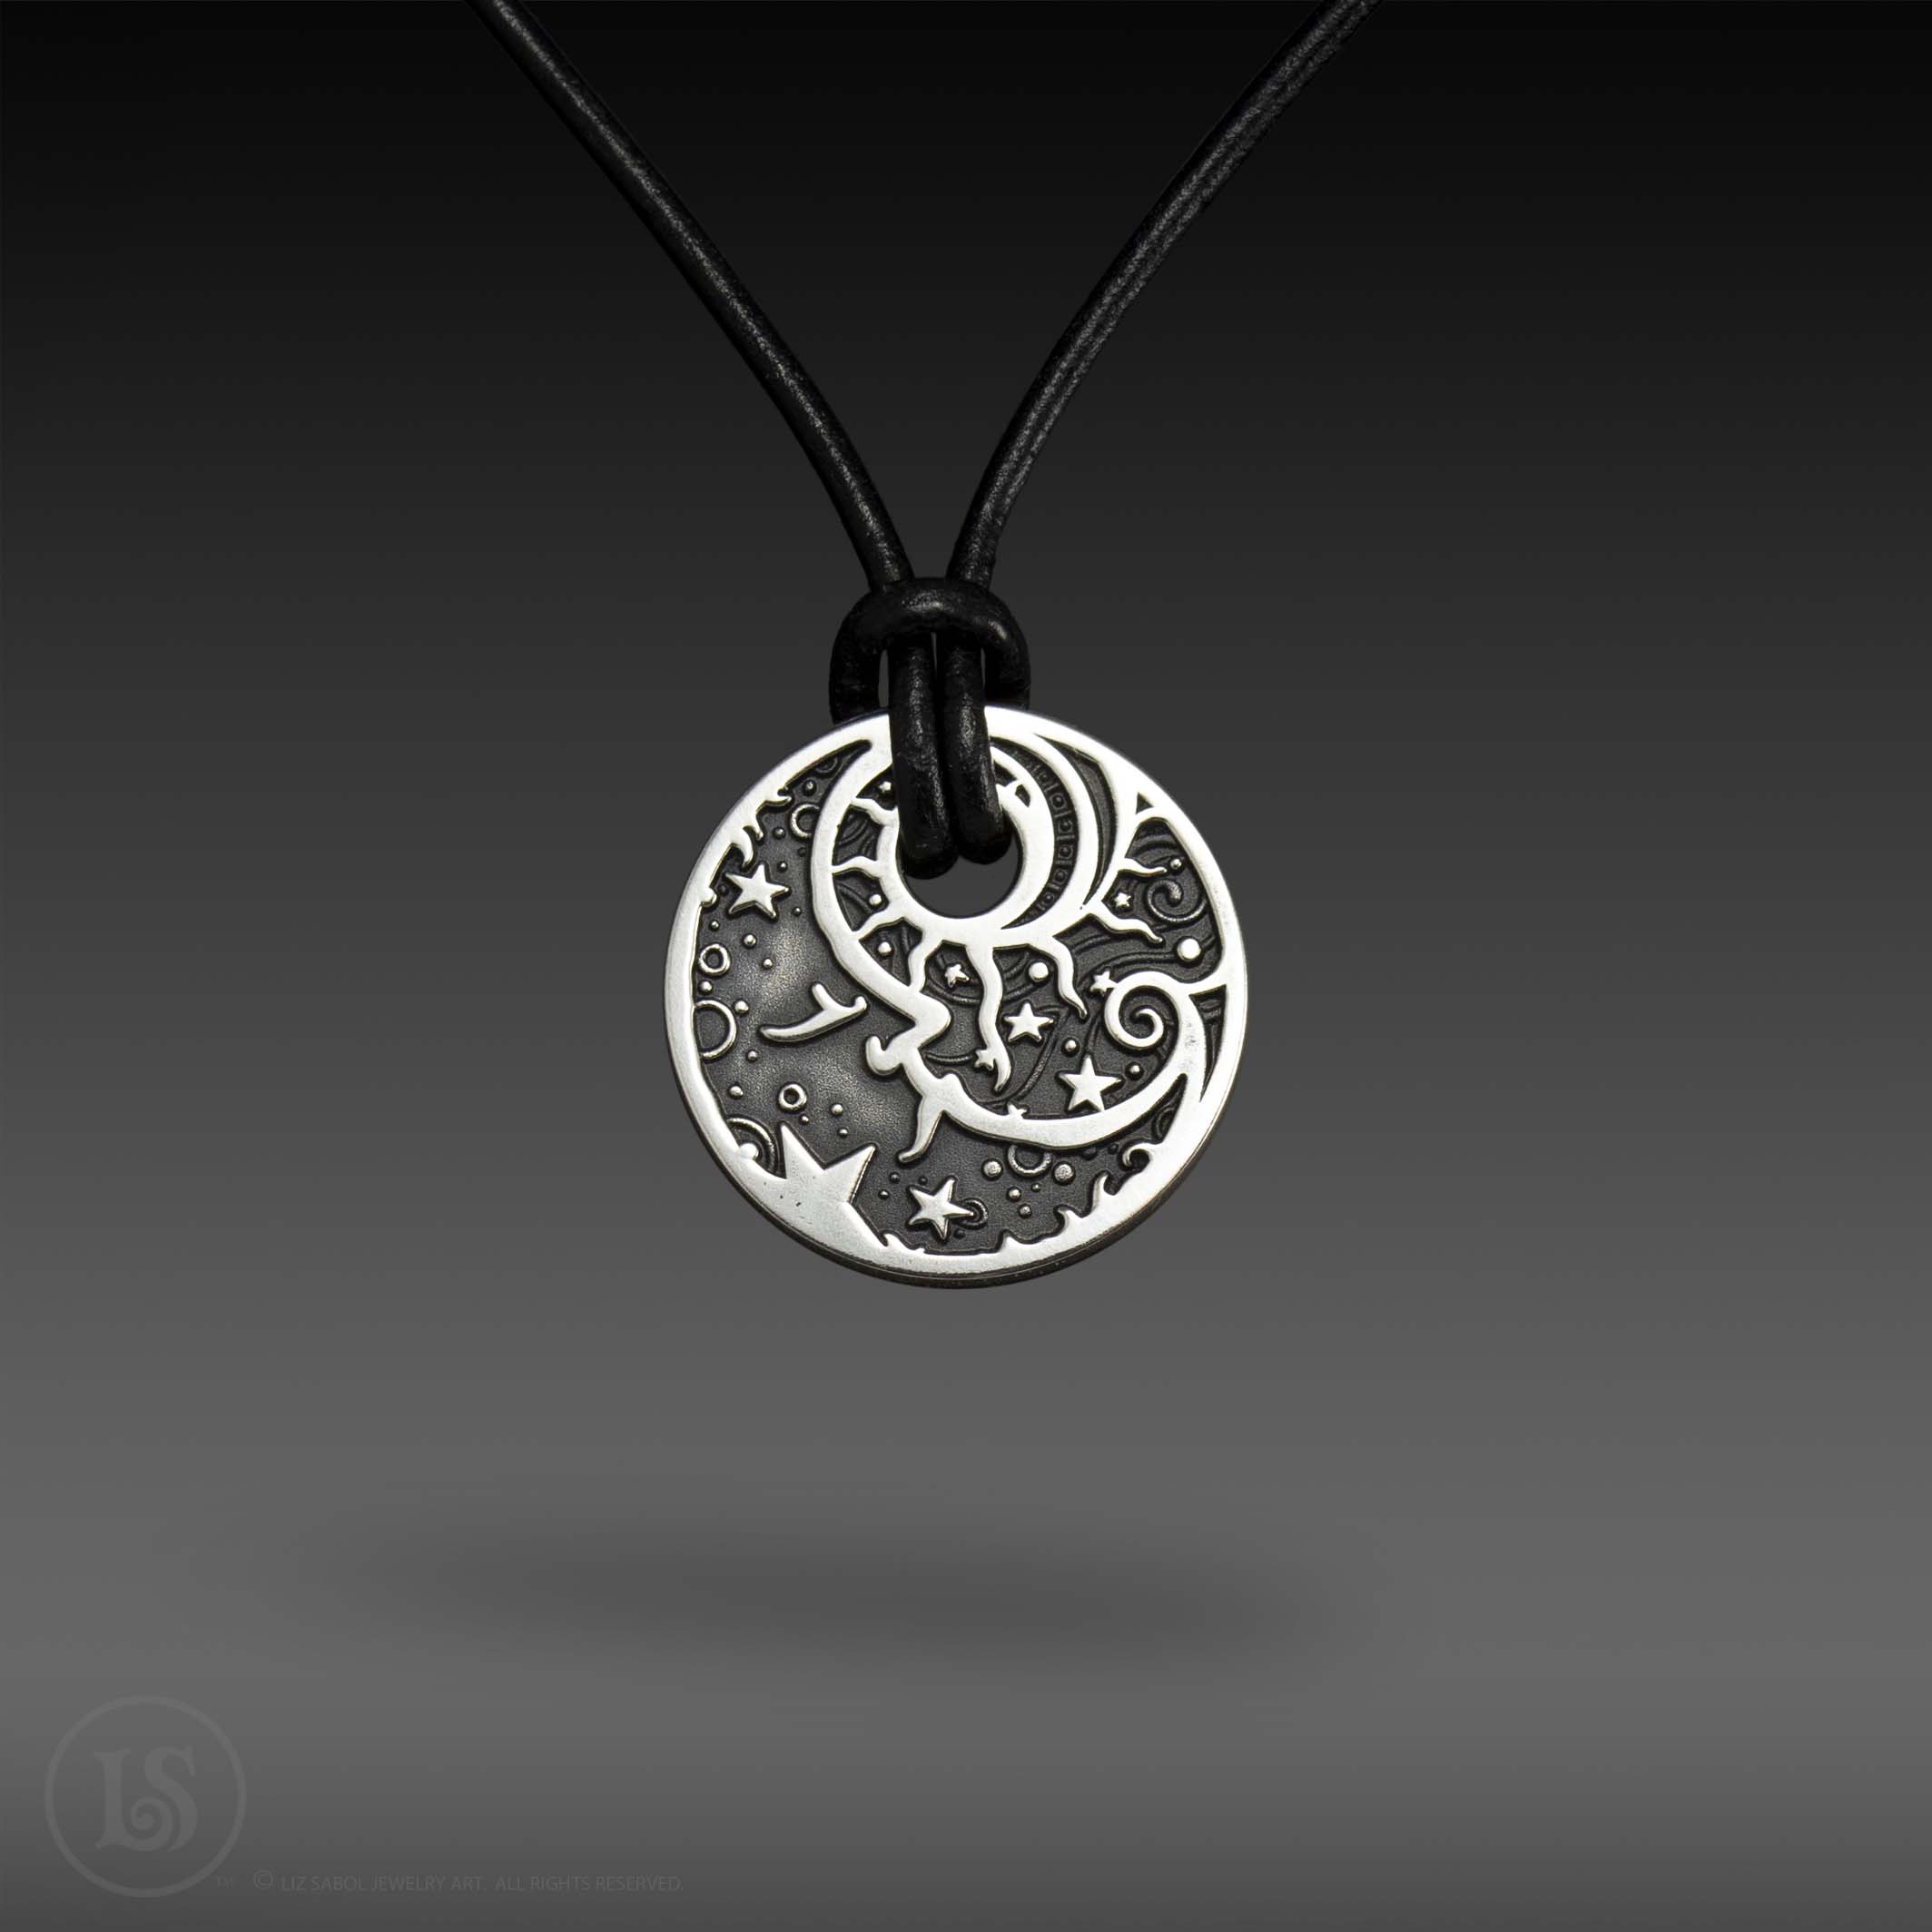 Man in the Moon Black, Small Pendant, Sterling Silver